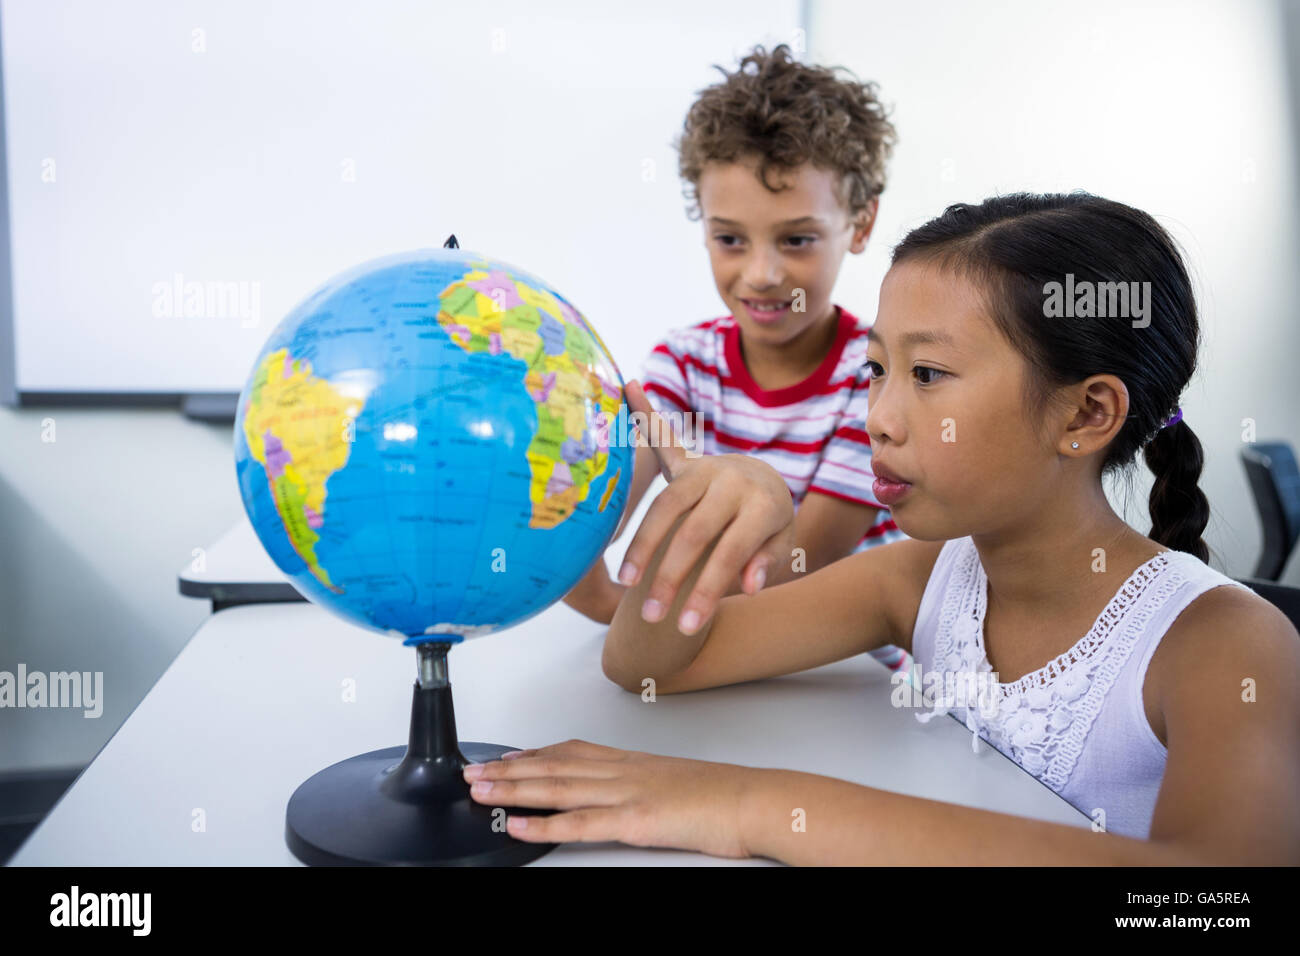 Elementary boy and girl looking at glob in classroom Stock Photo